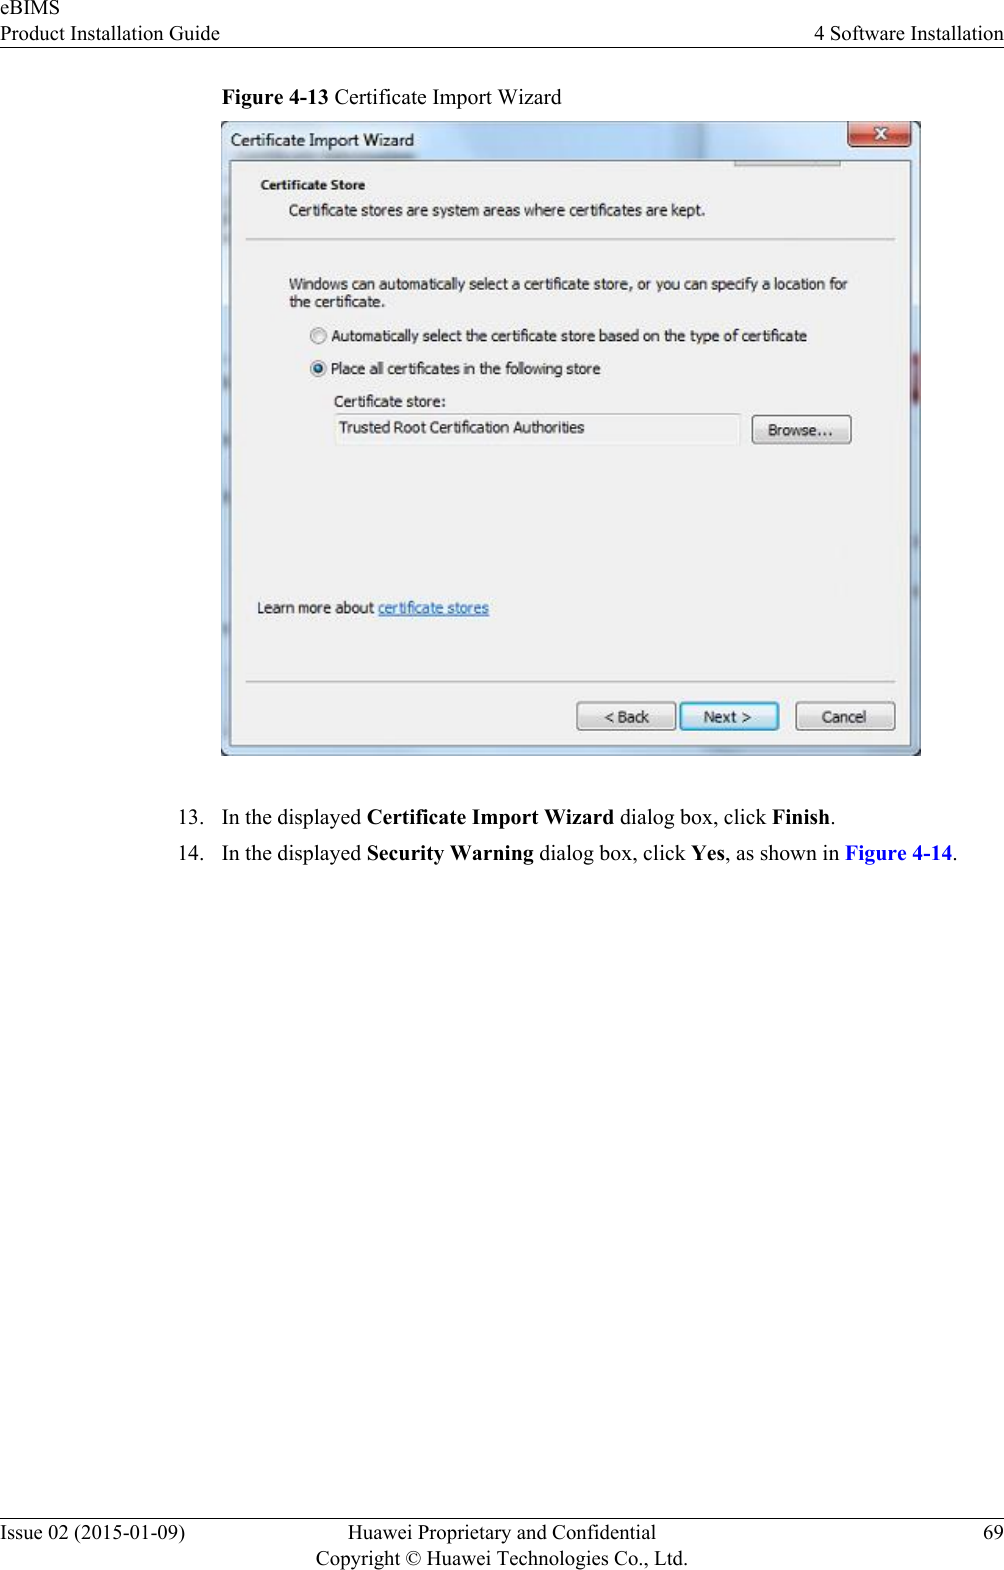 Figure 4-13 Certificate Import Wizard13. In the displayed Certificate Import Wizard dialog box, click Finish.14. In the displayed Security Warning dialog box, click Yes, as shown in Figure 4-14.eBIMSProduct Installation Guide 4 Software InstallationIssue 02 (2015-01-09) Huawei Proprietary and ConfidentialCopyright © Huawei Technologies Co., Ltd.69